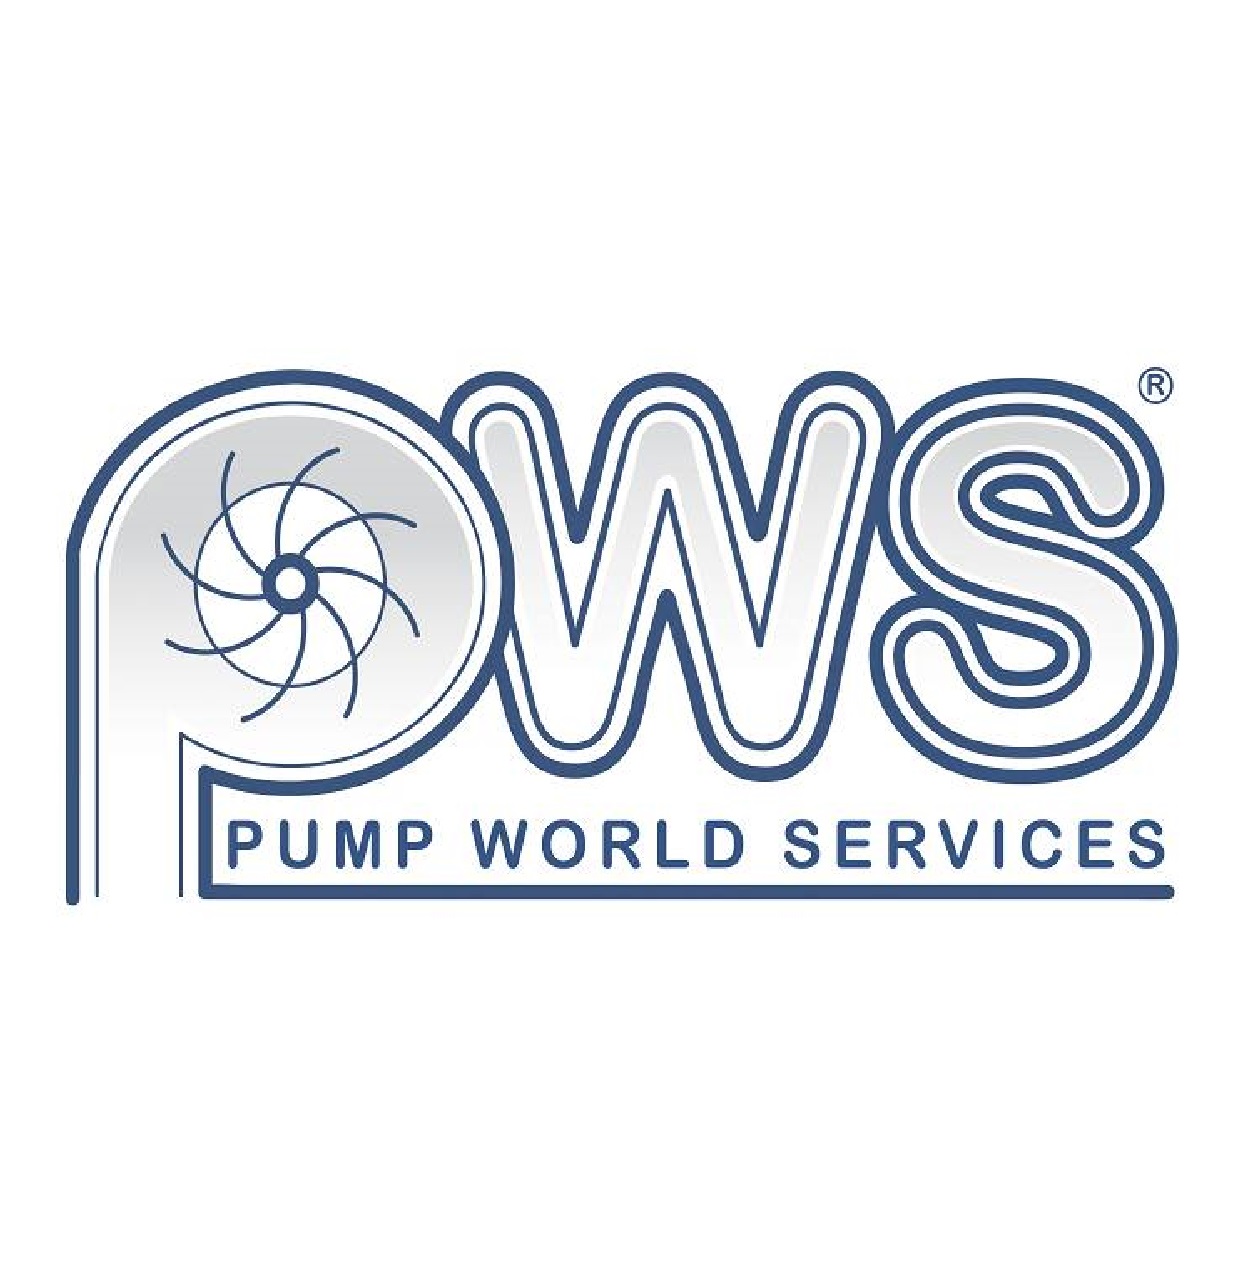 Pump World Services - PWS is a company